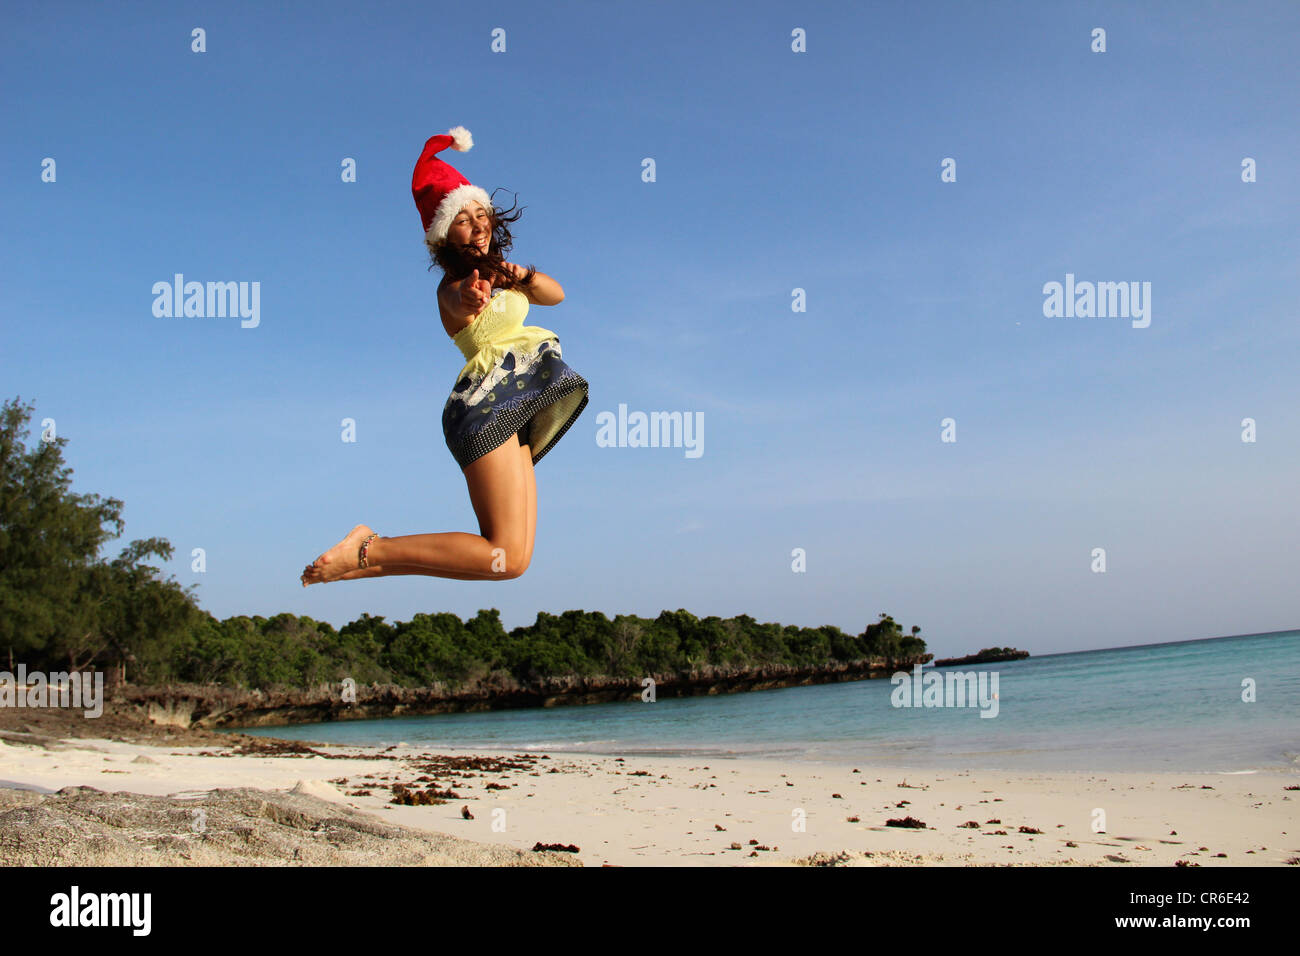 L'Afrique, Tanzanie, Teenage girl jumping at beach Banque D'Images